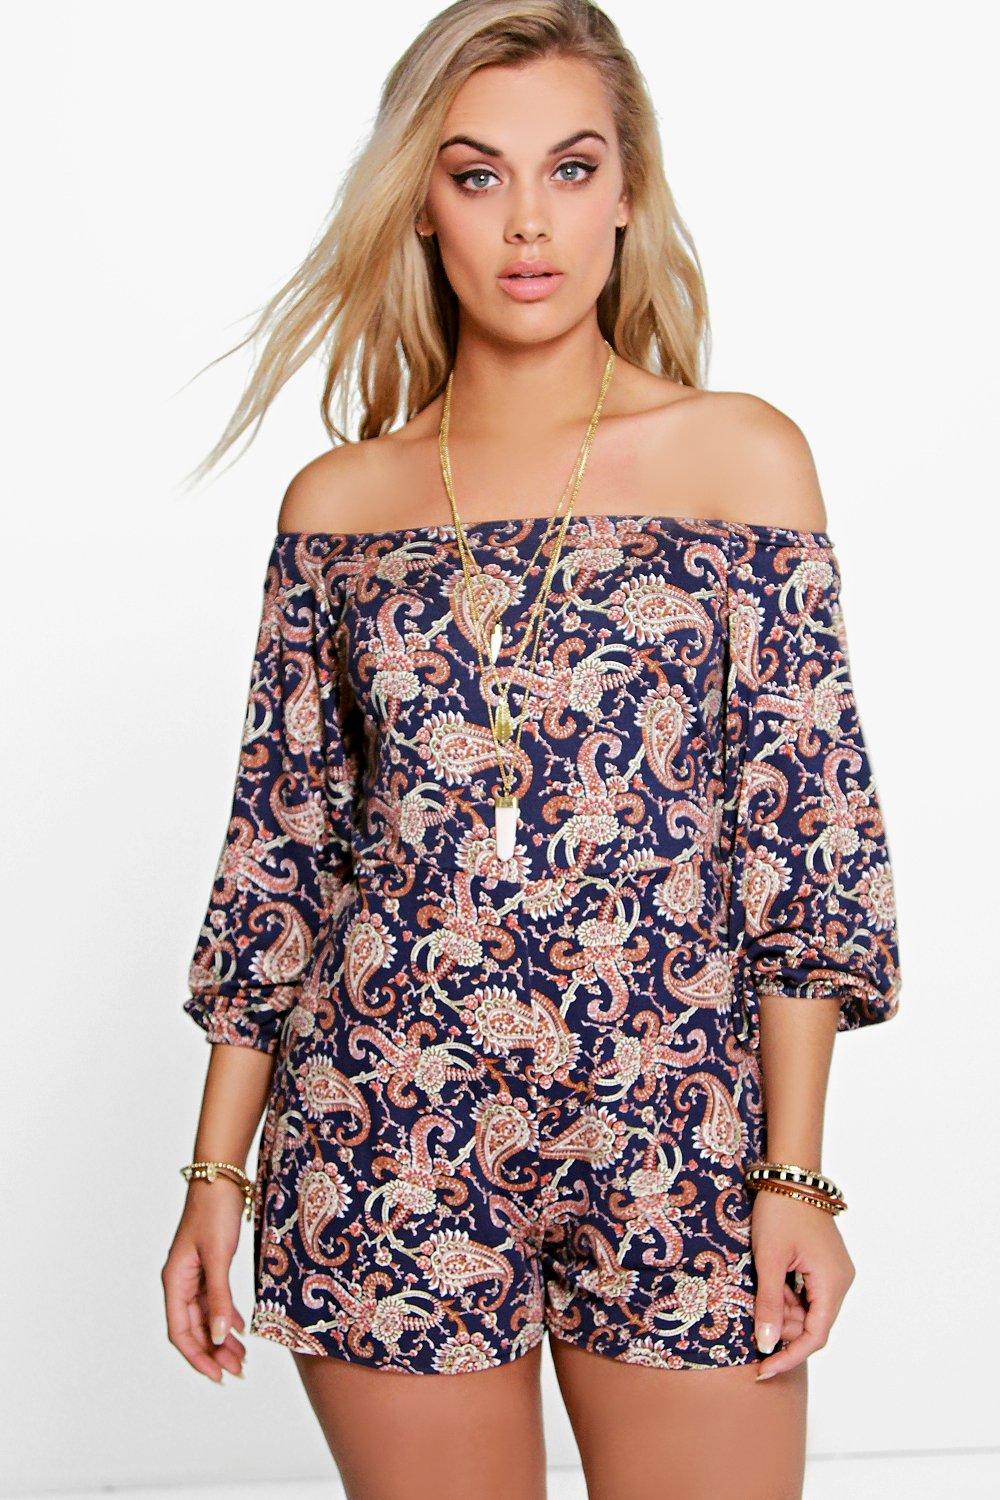 Plus Zoey Paisley Print Off The Shoulder Playsuit at boohoo.com